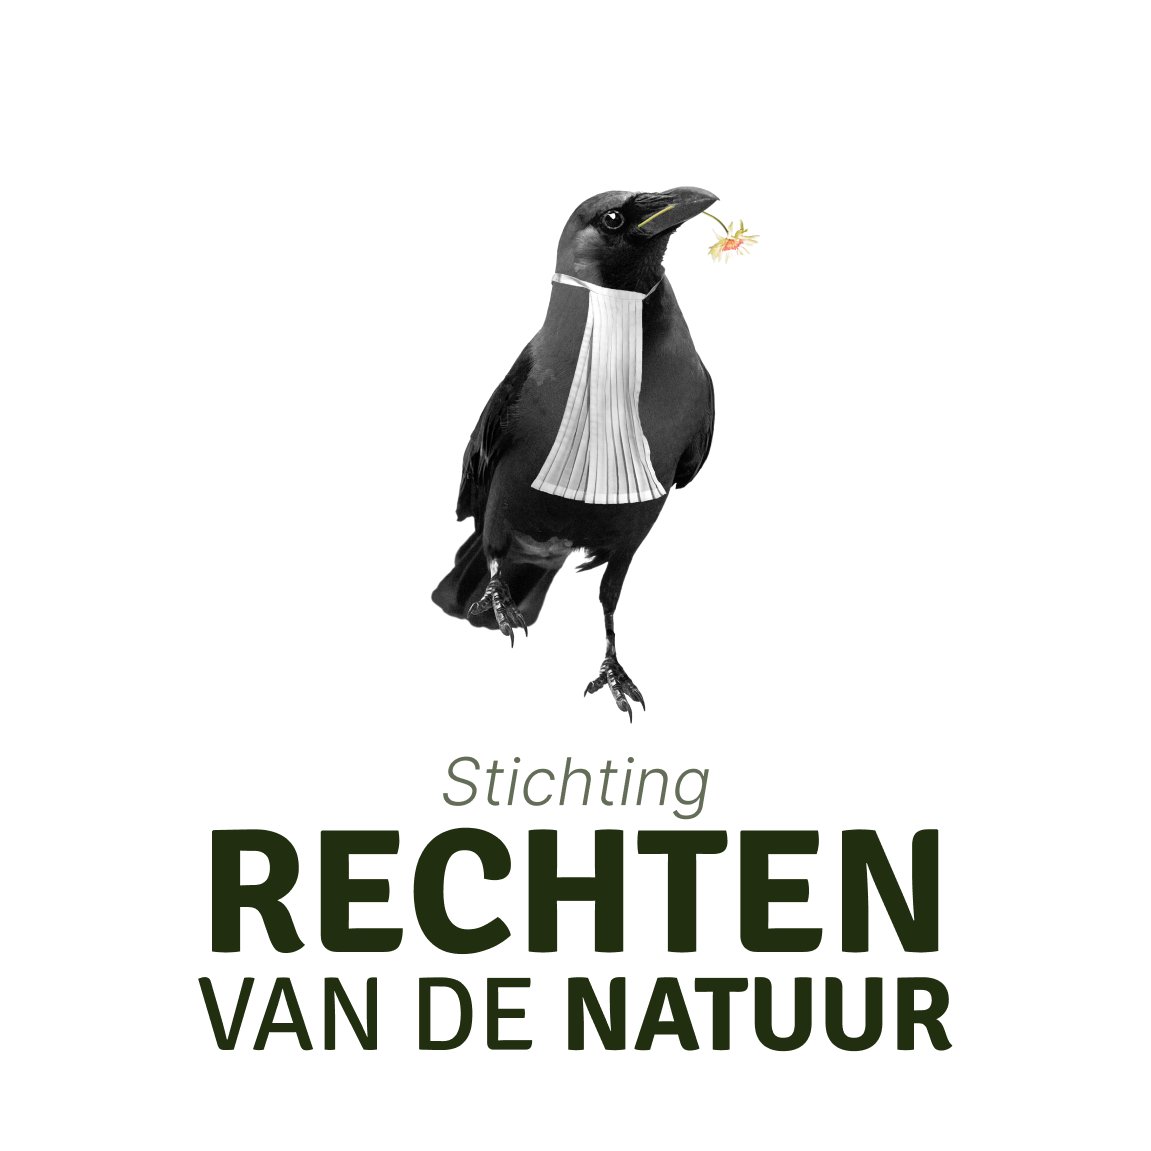 🌿👏🇳🇱 Exciting news! The Dutch Foundation for the #RightsofNature (Stichting Rechten van de Natuur) was launched, led by @JessicadenOuter. This milestone initiative aims to embed RoN in Dutch law and grant legal personhood to the Wadden Sea. rechtenvandenatuur.org